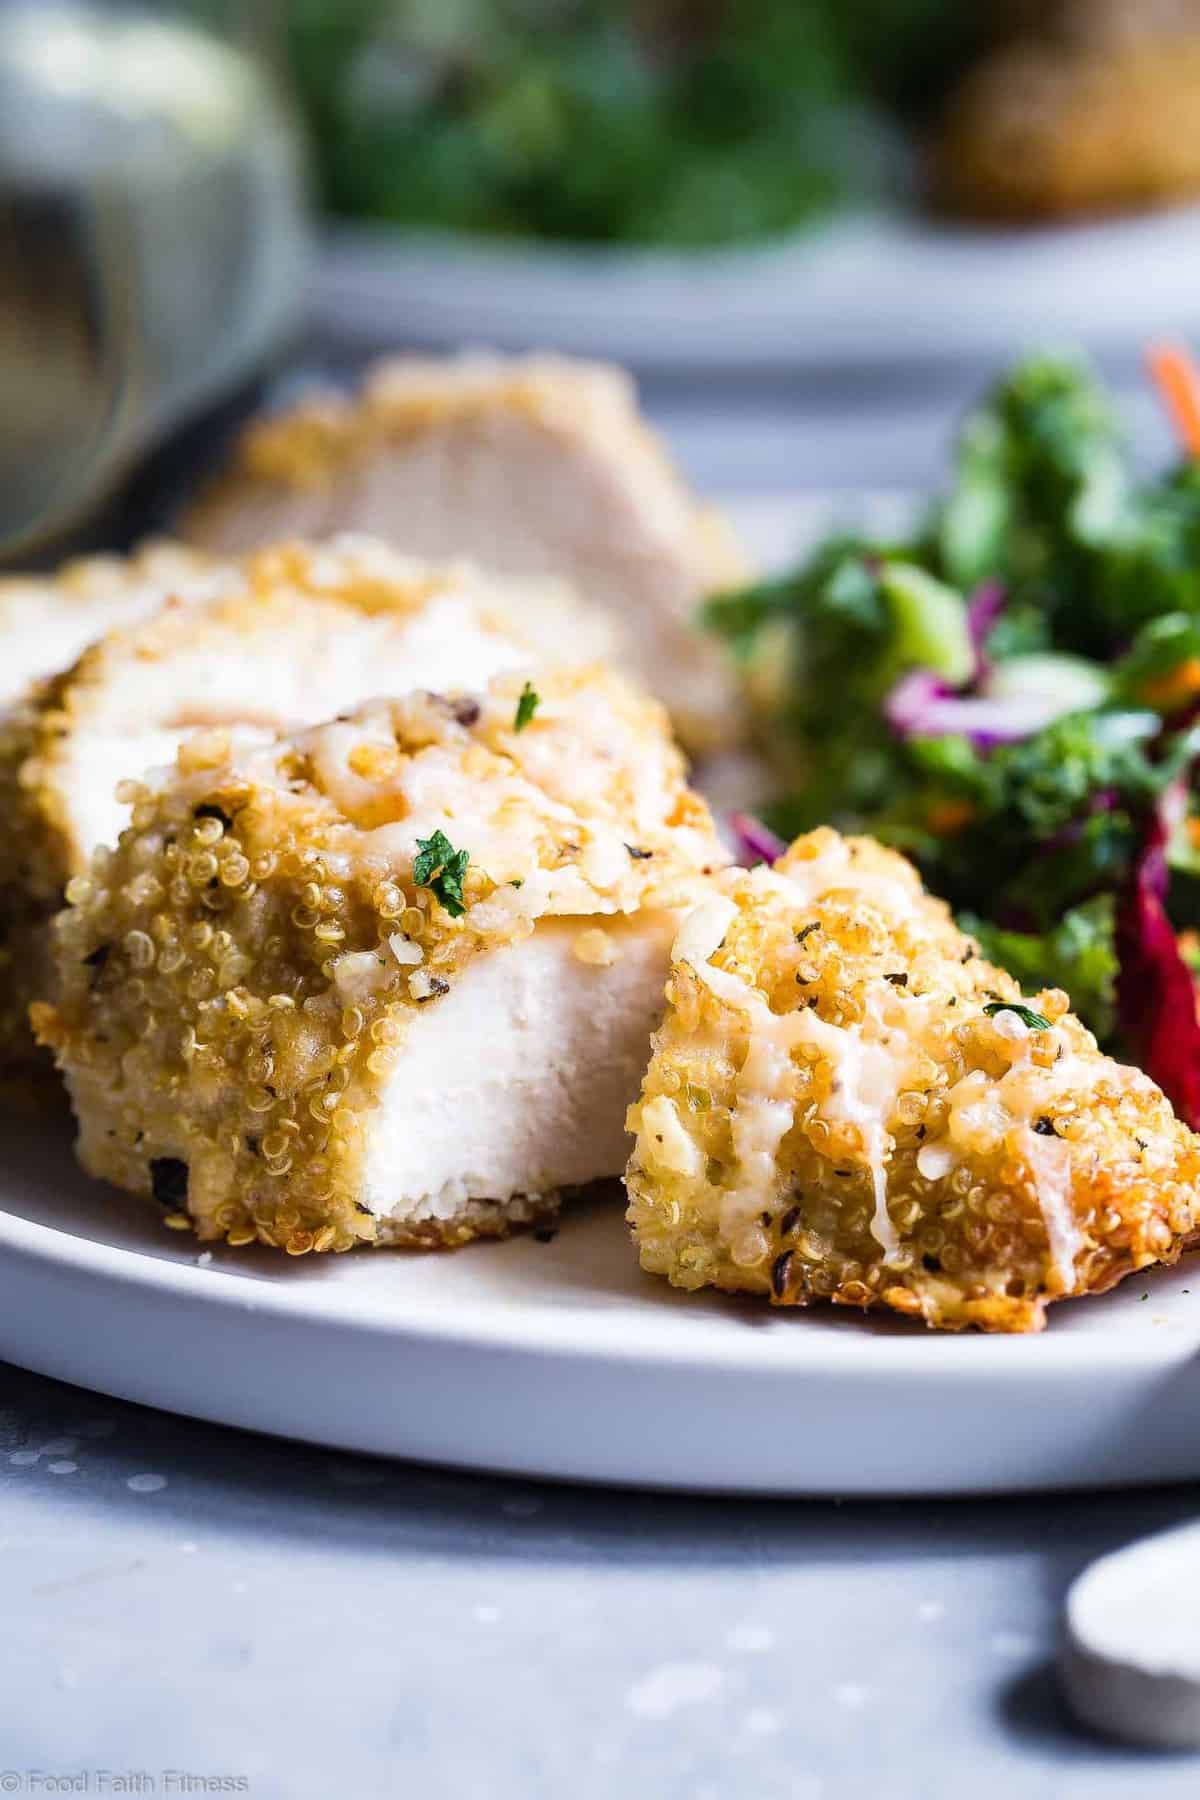 Goat Cheese Quinoa Crusted Chicken - A quick, healthy and gluten free dinner that feels fancy, but is so easy!  A perfect meal for busy weeknights that both kids and adults will love! | #Foodfaithfitness | #Glutenfree #Healthy #Cleaneating #Quinoa #Chickenrecipes